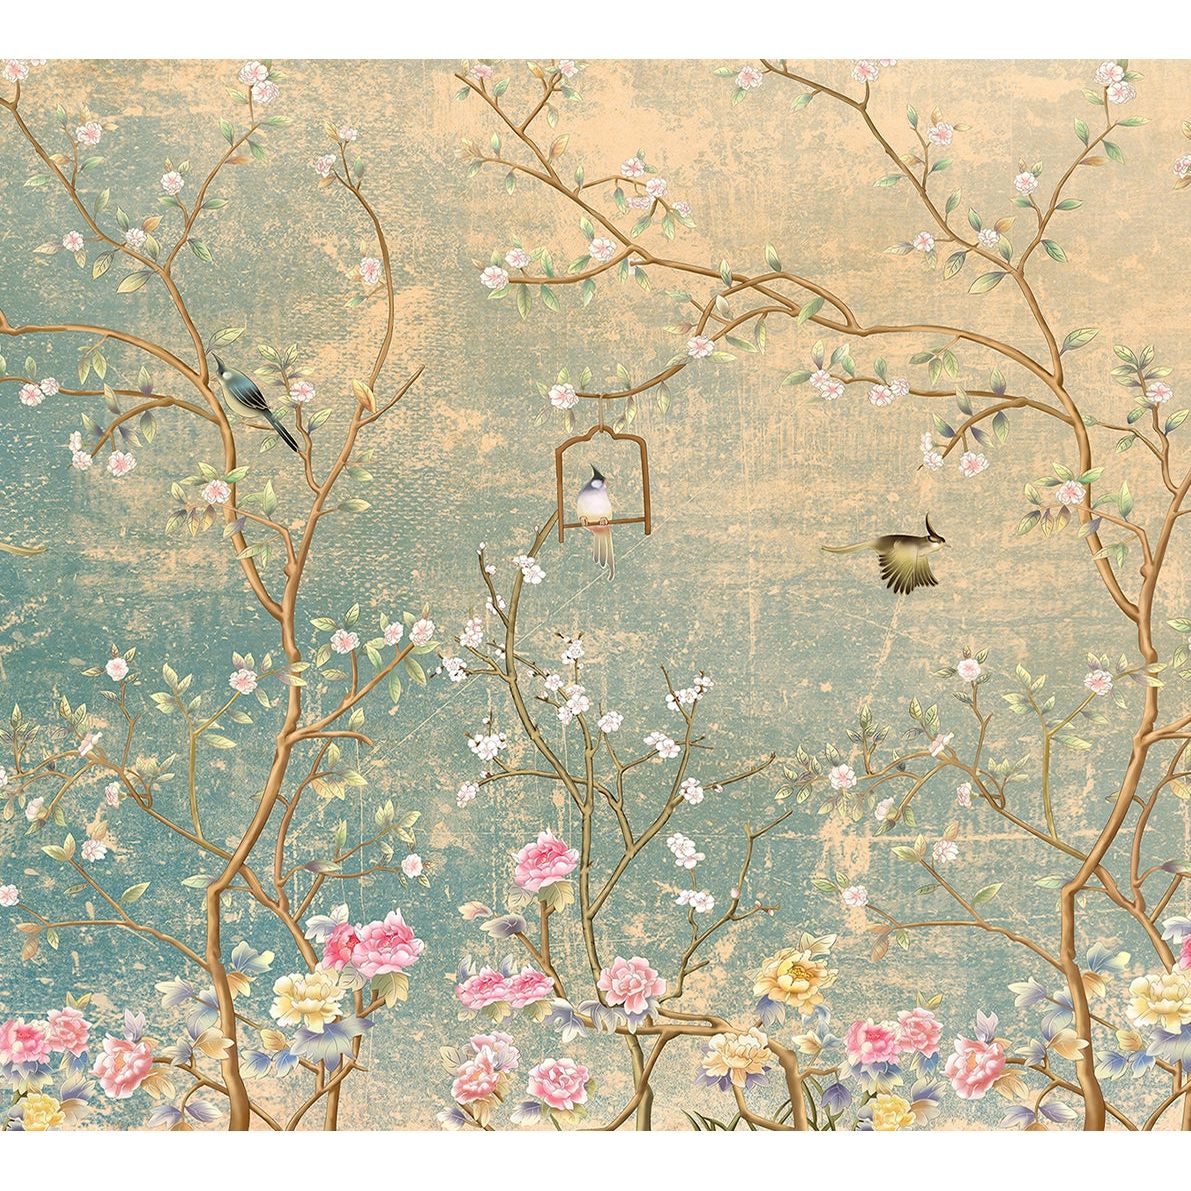 Sunlit Canopy: Blue & Yellow Branches & Birds Wall Mural